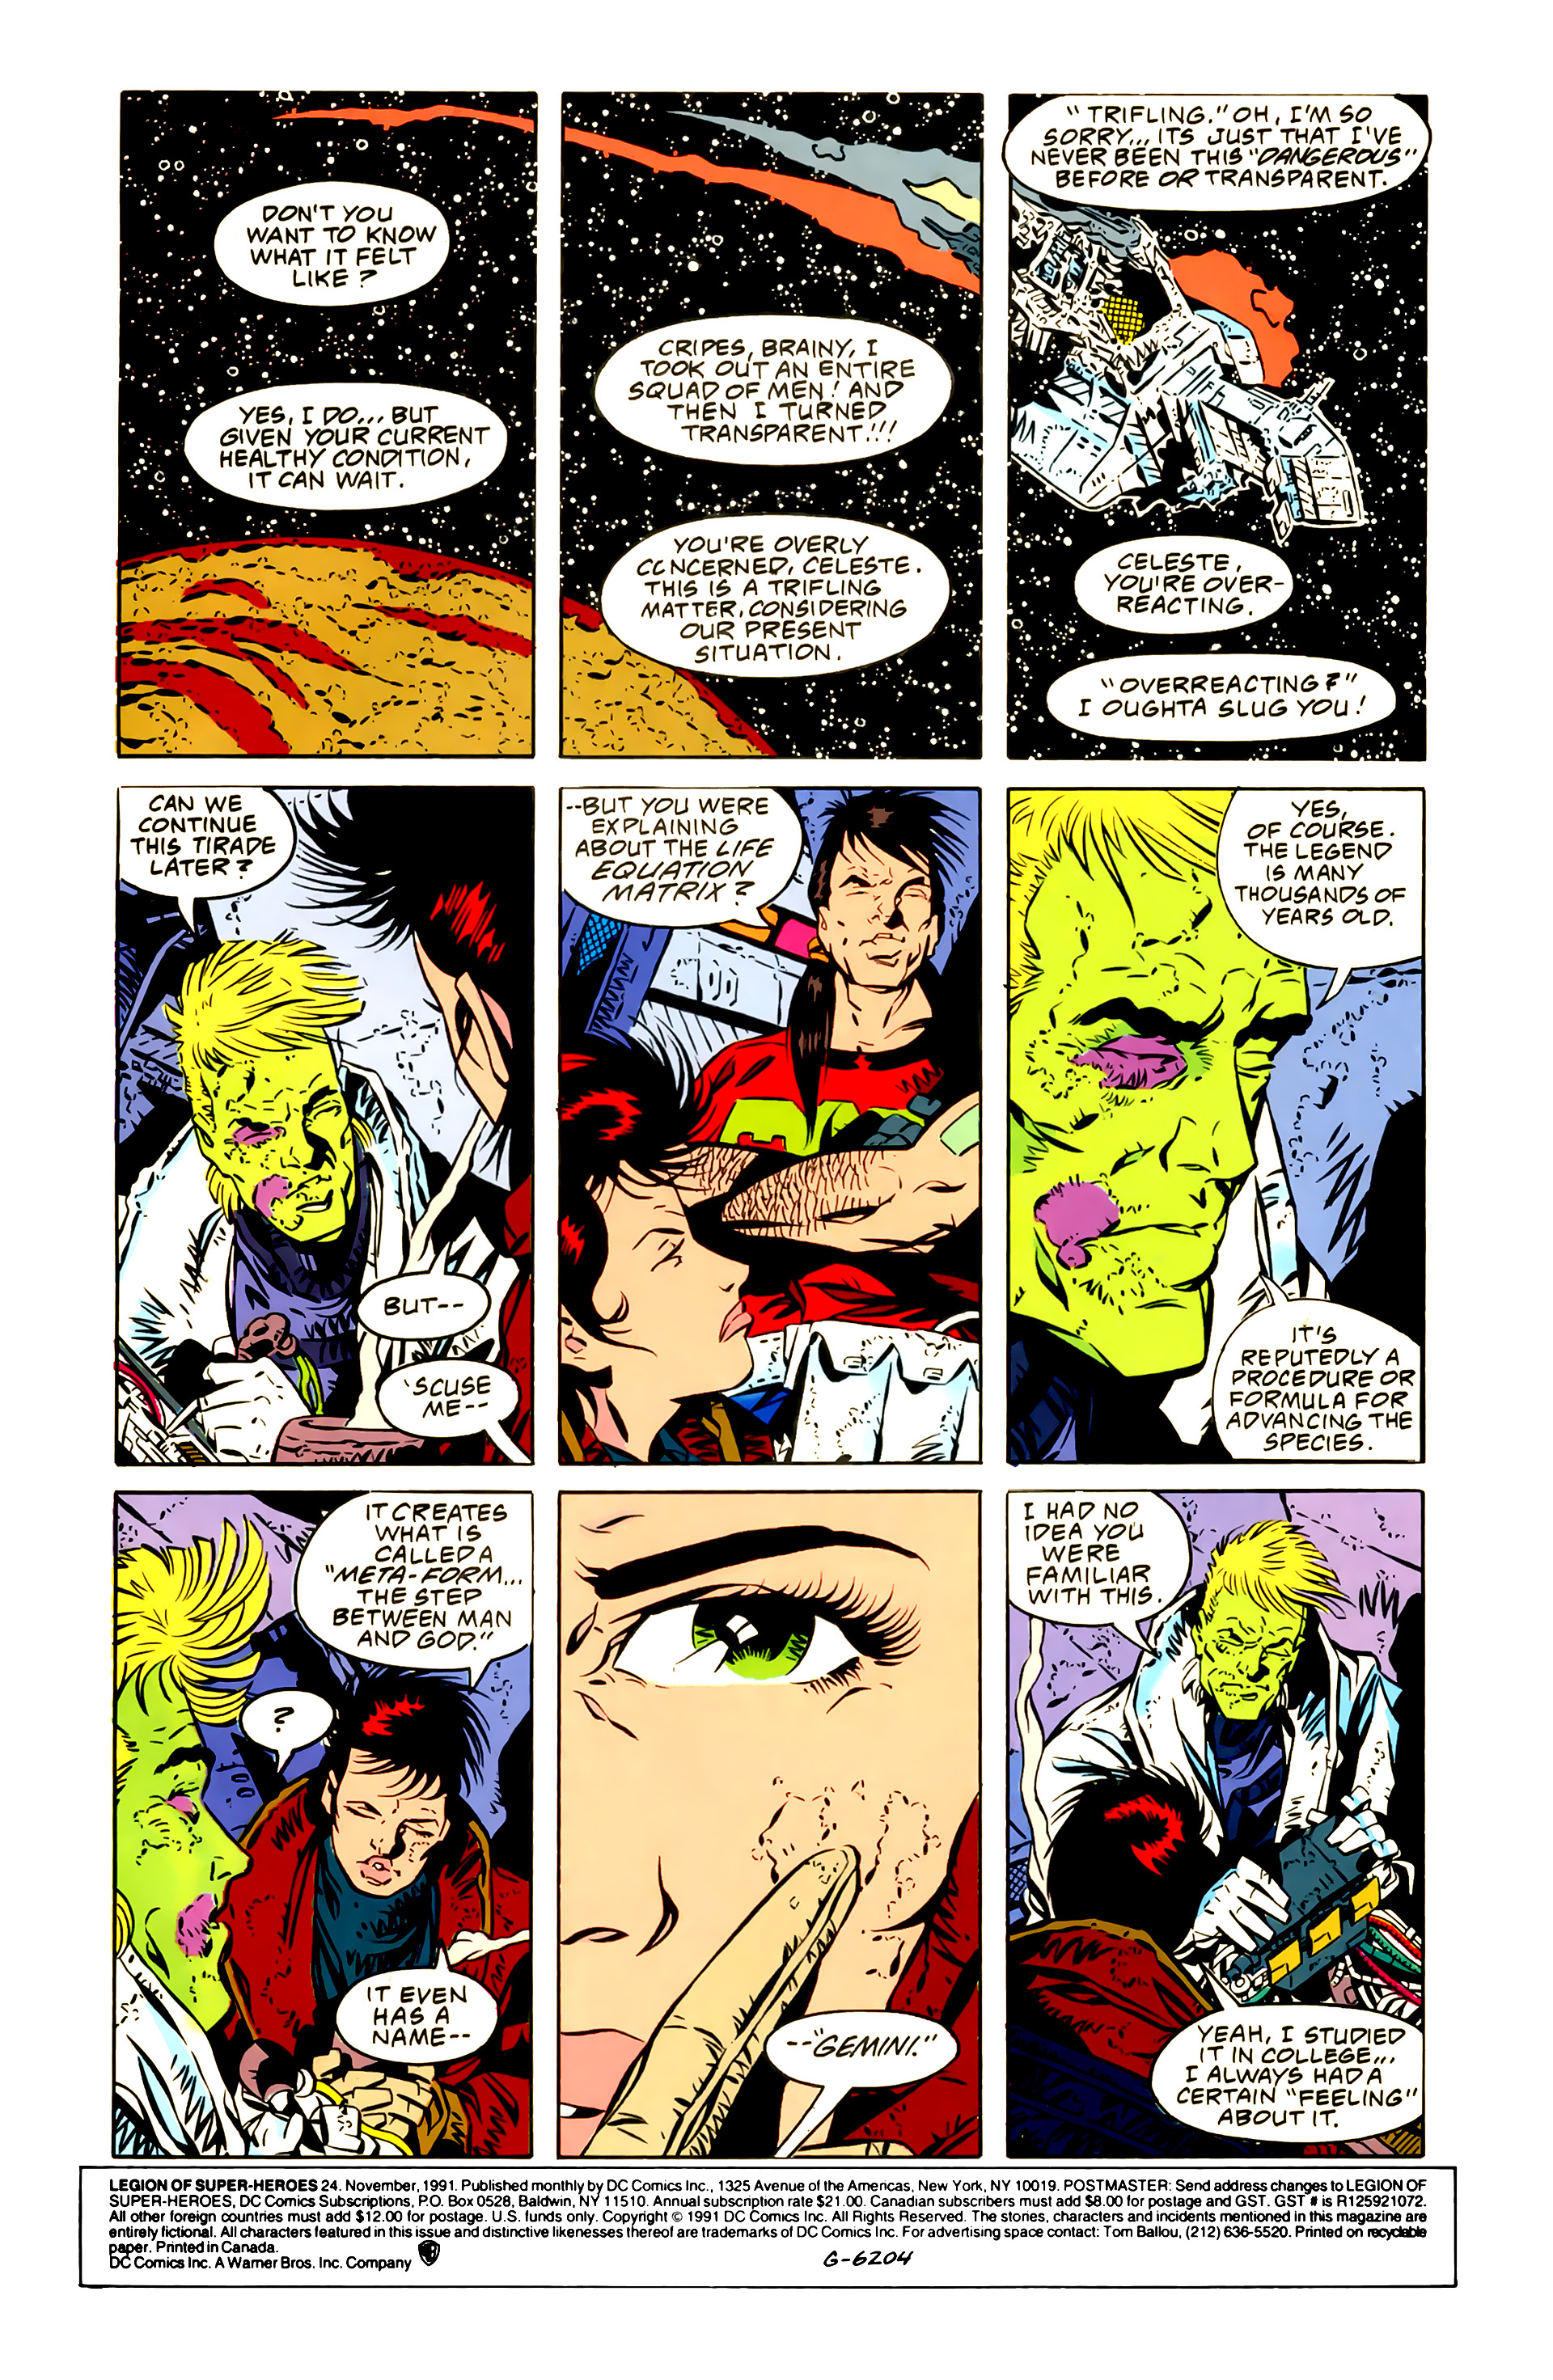 Legion of Super-Heroes (1989) 24 Page 1